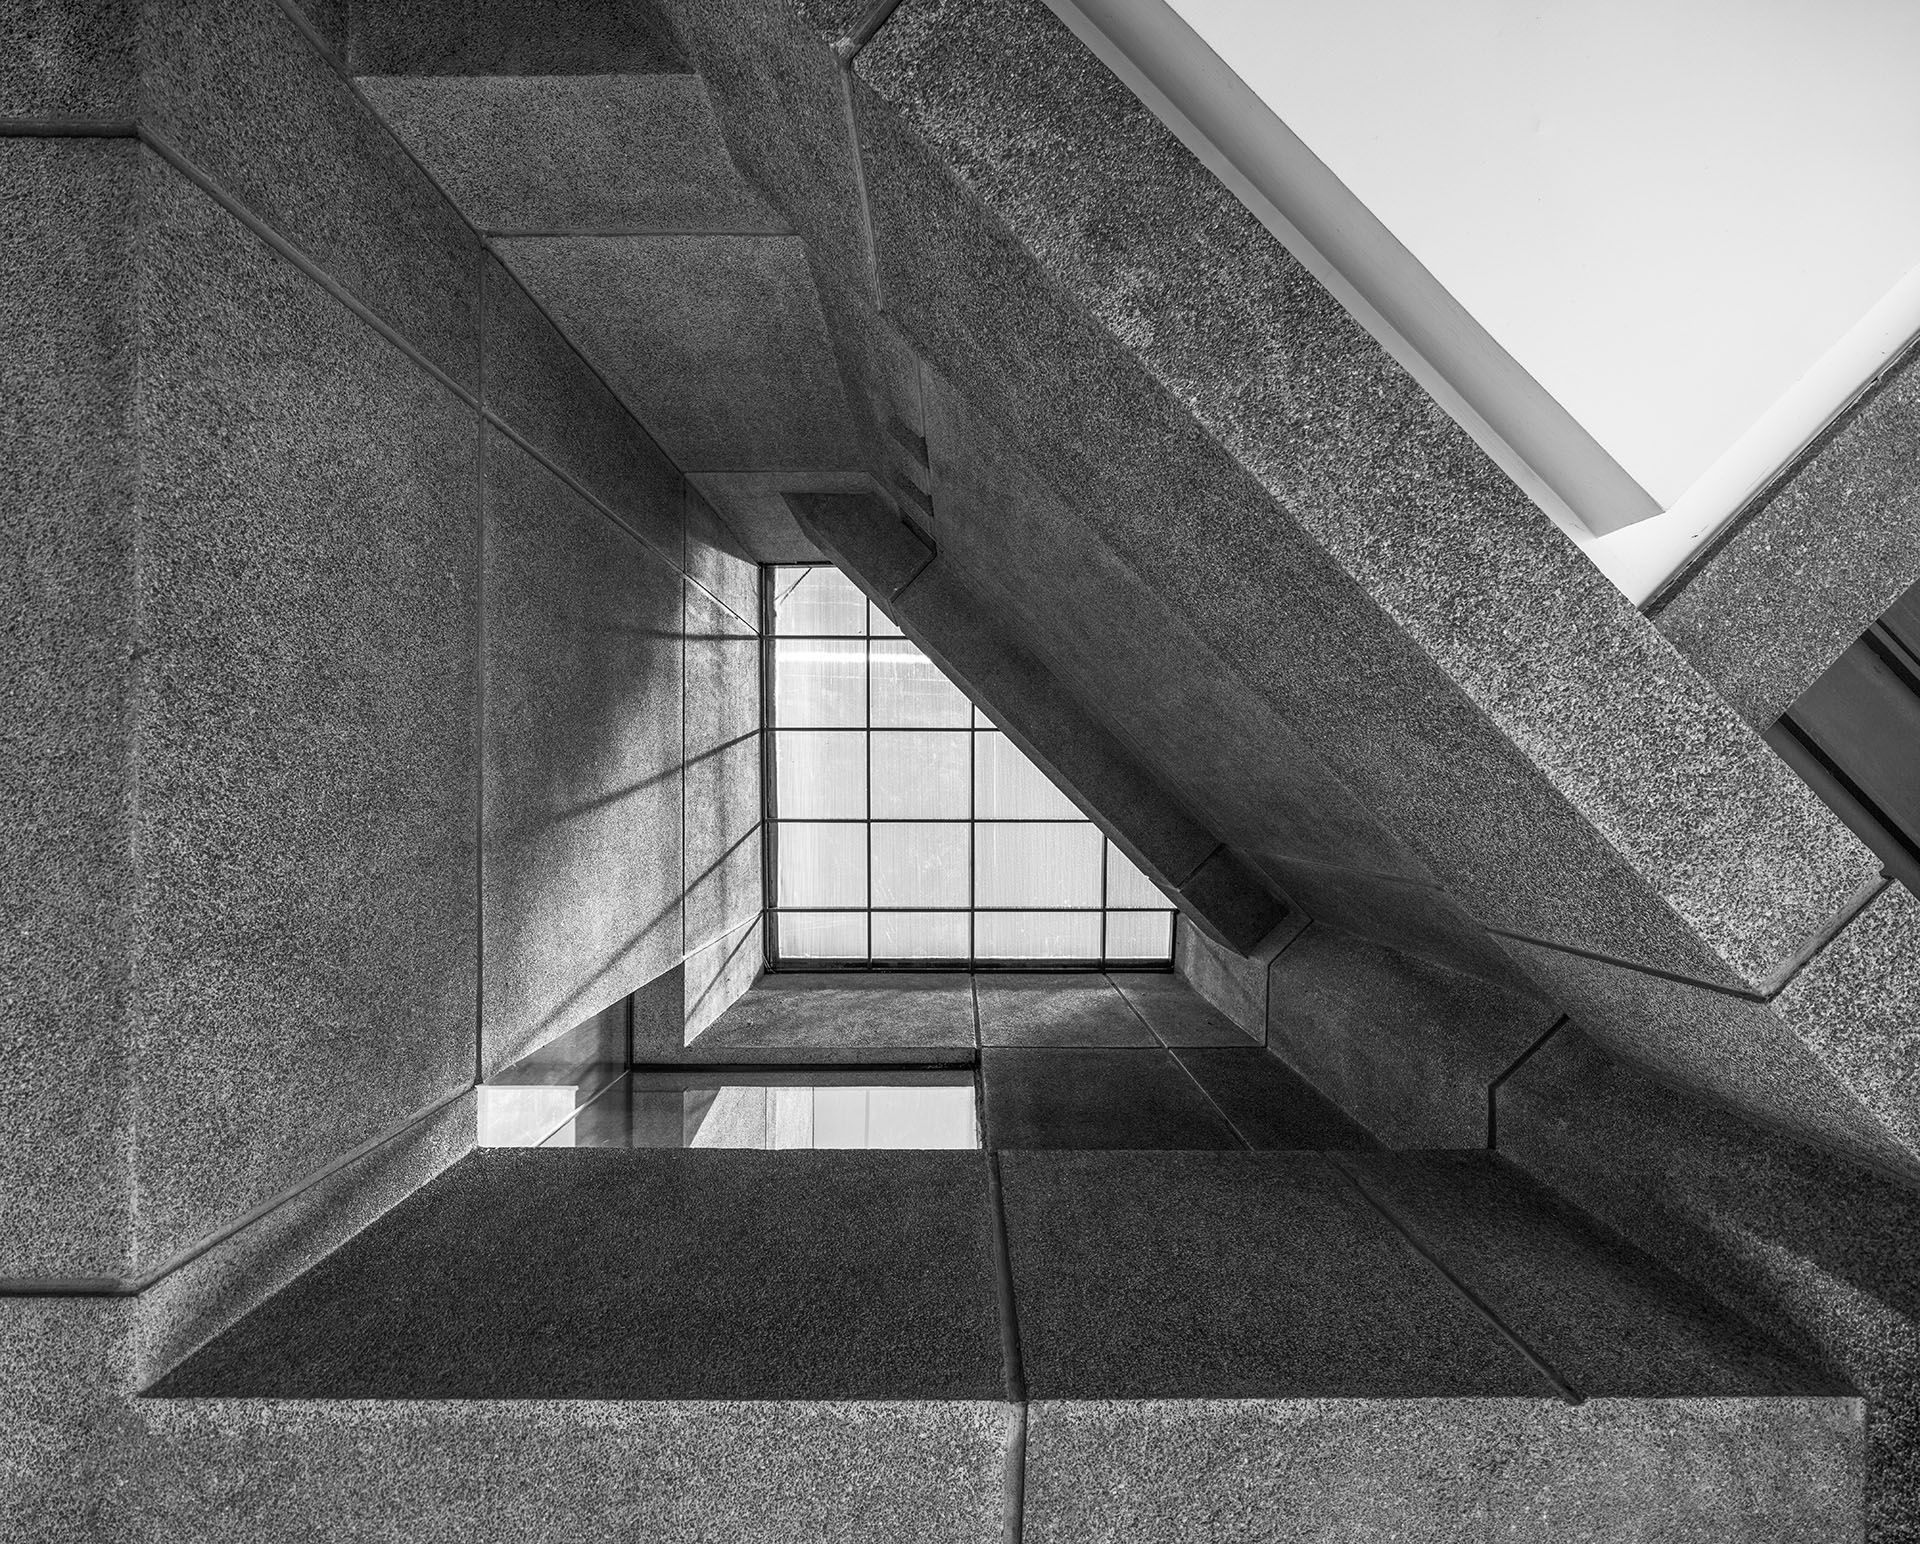 Black and white detail photo of a translucent atrium in Plaza Rolex, surrounded by solid concrete walls